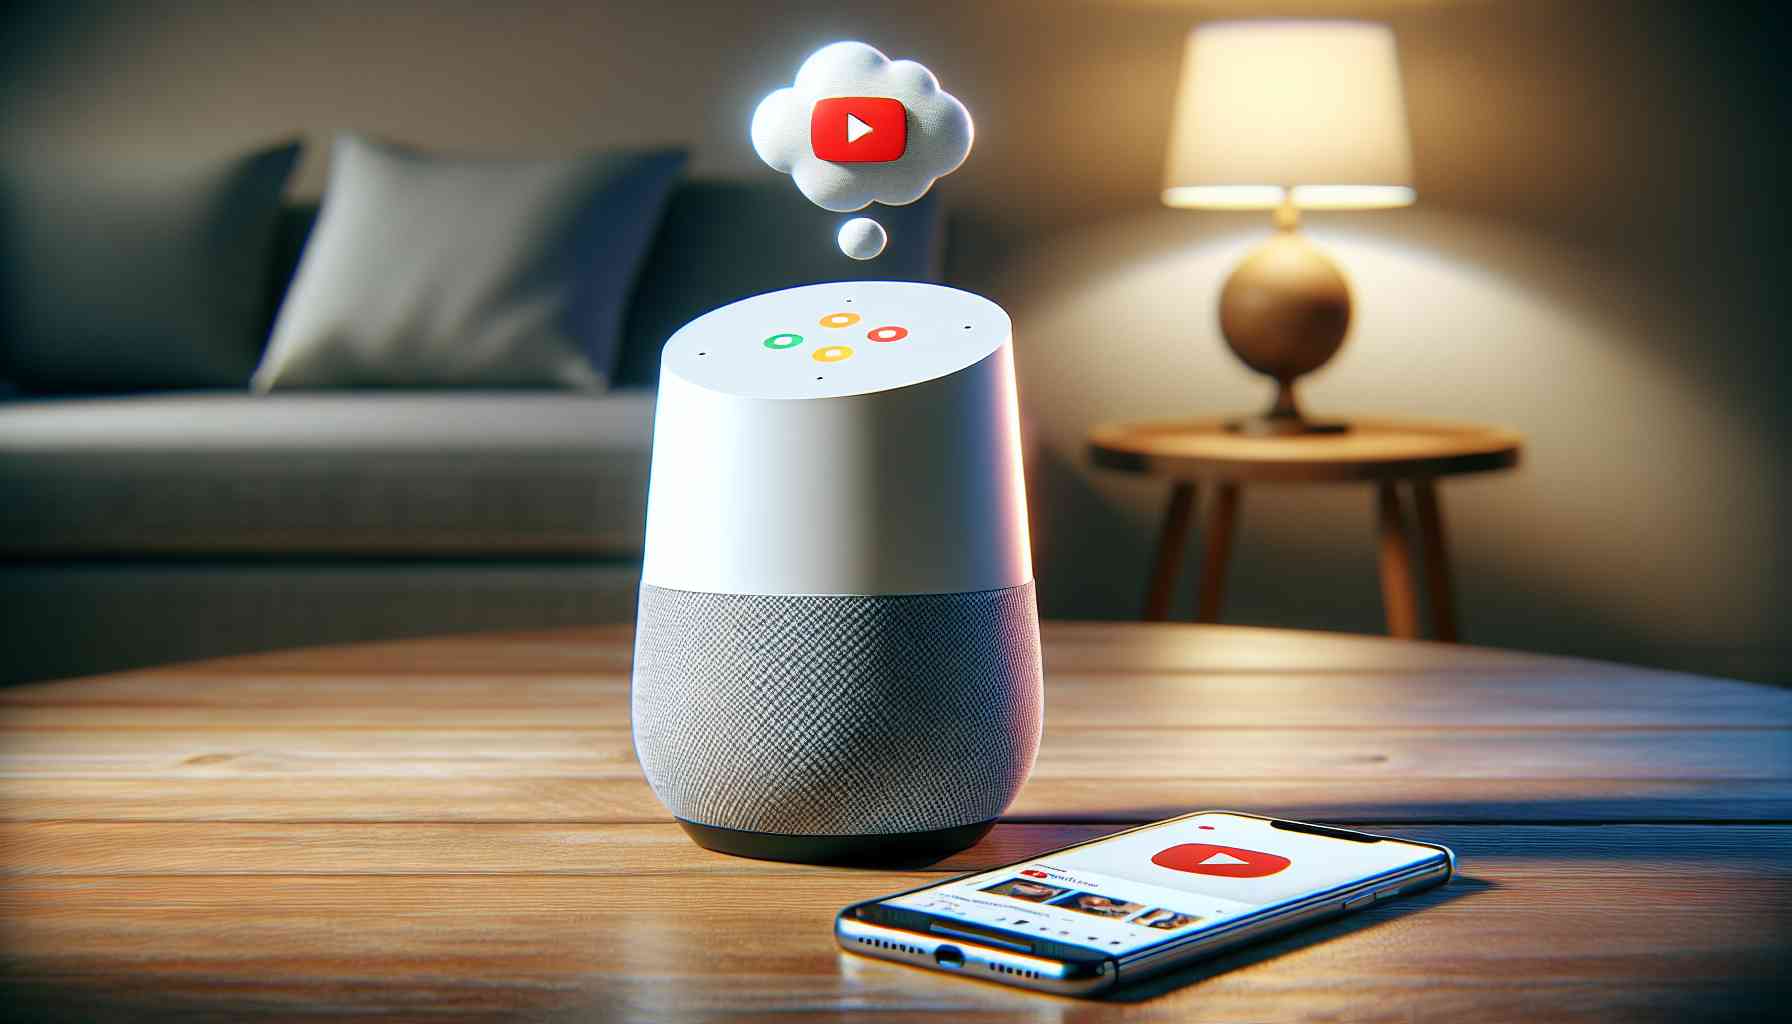 How To Play Youtube On Google Home